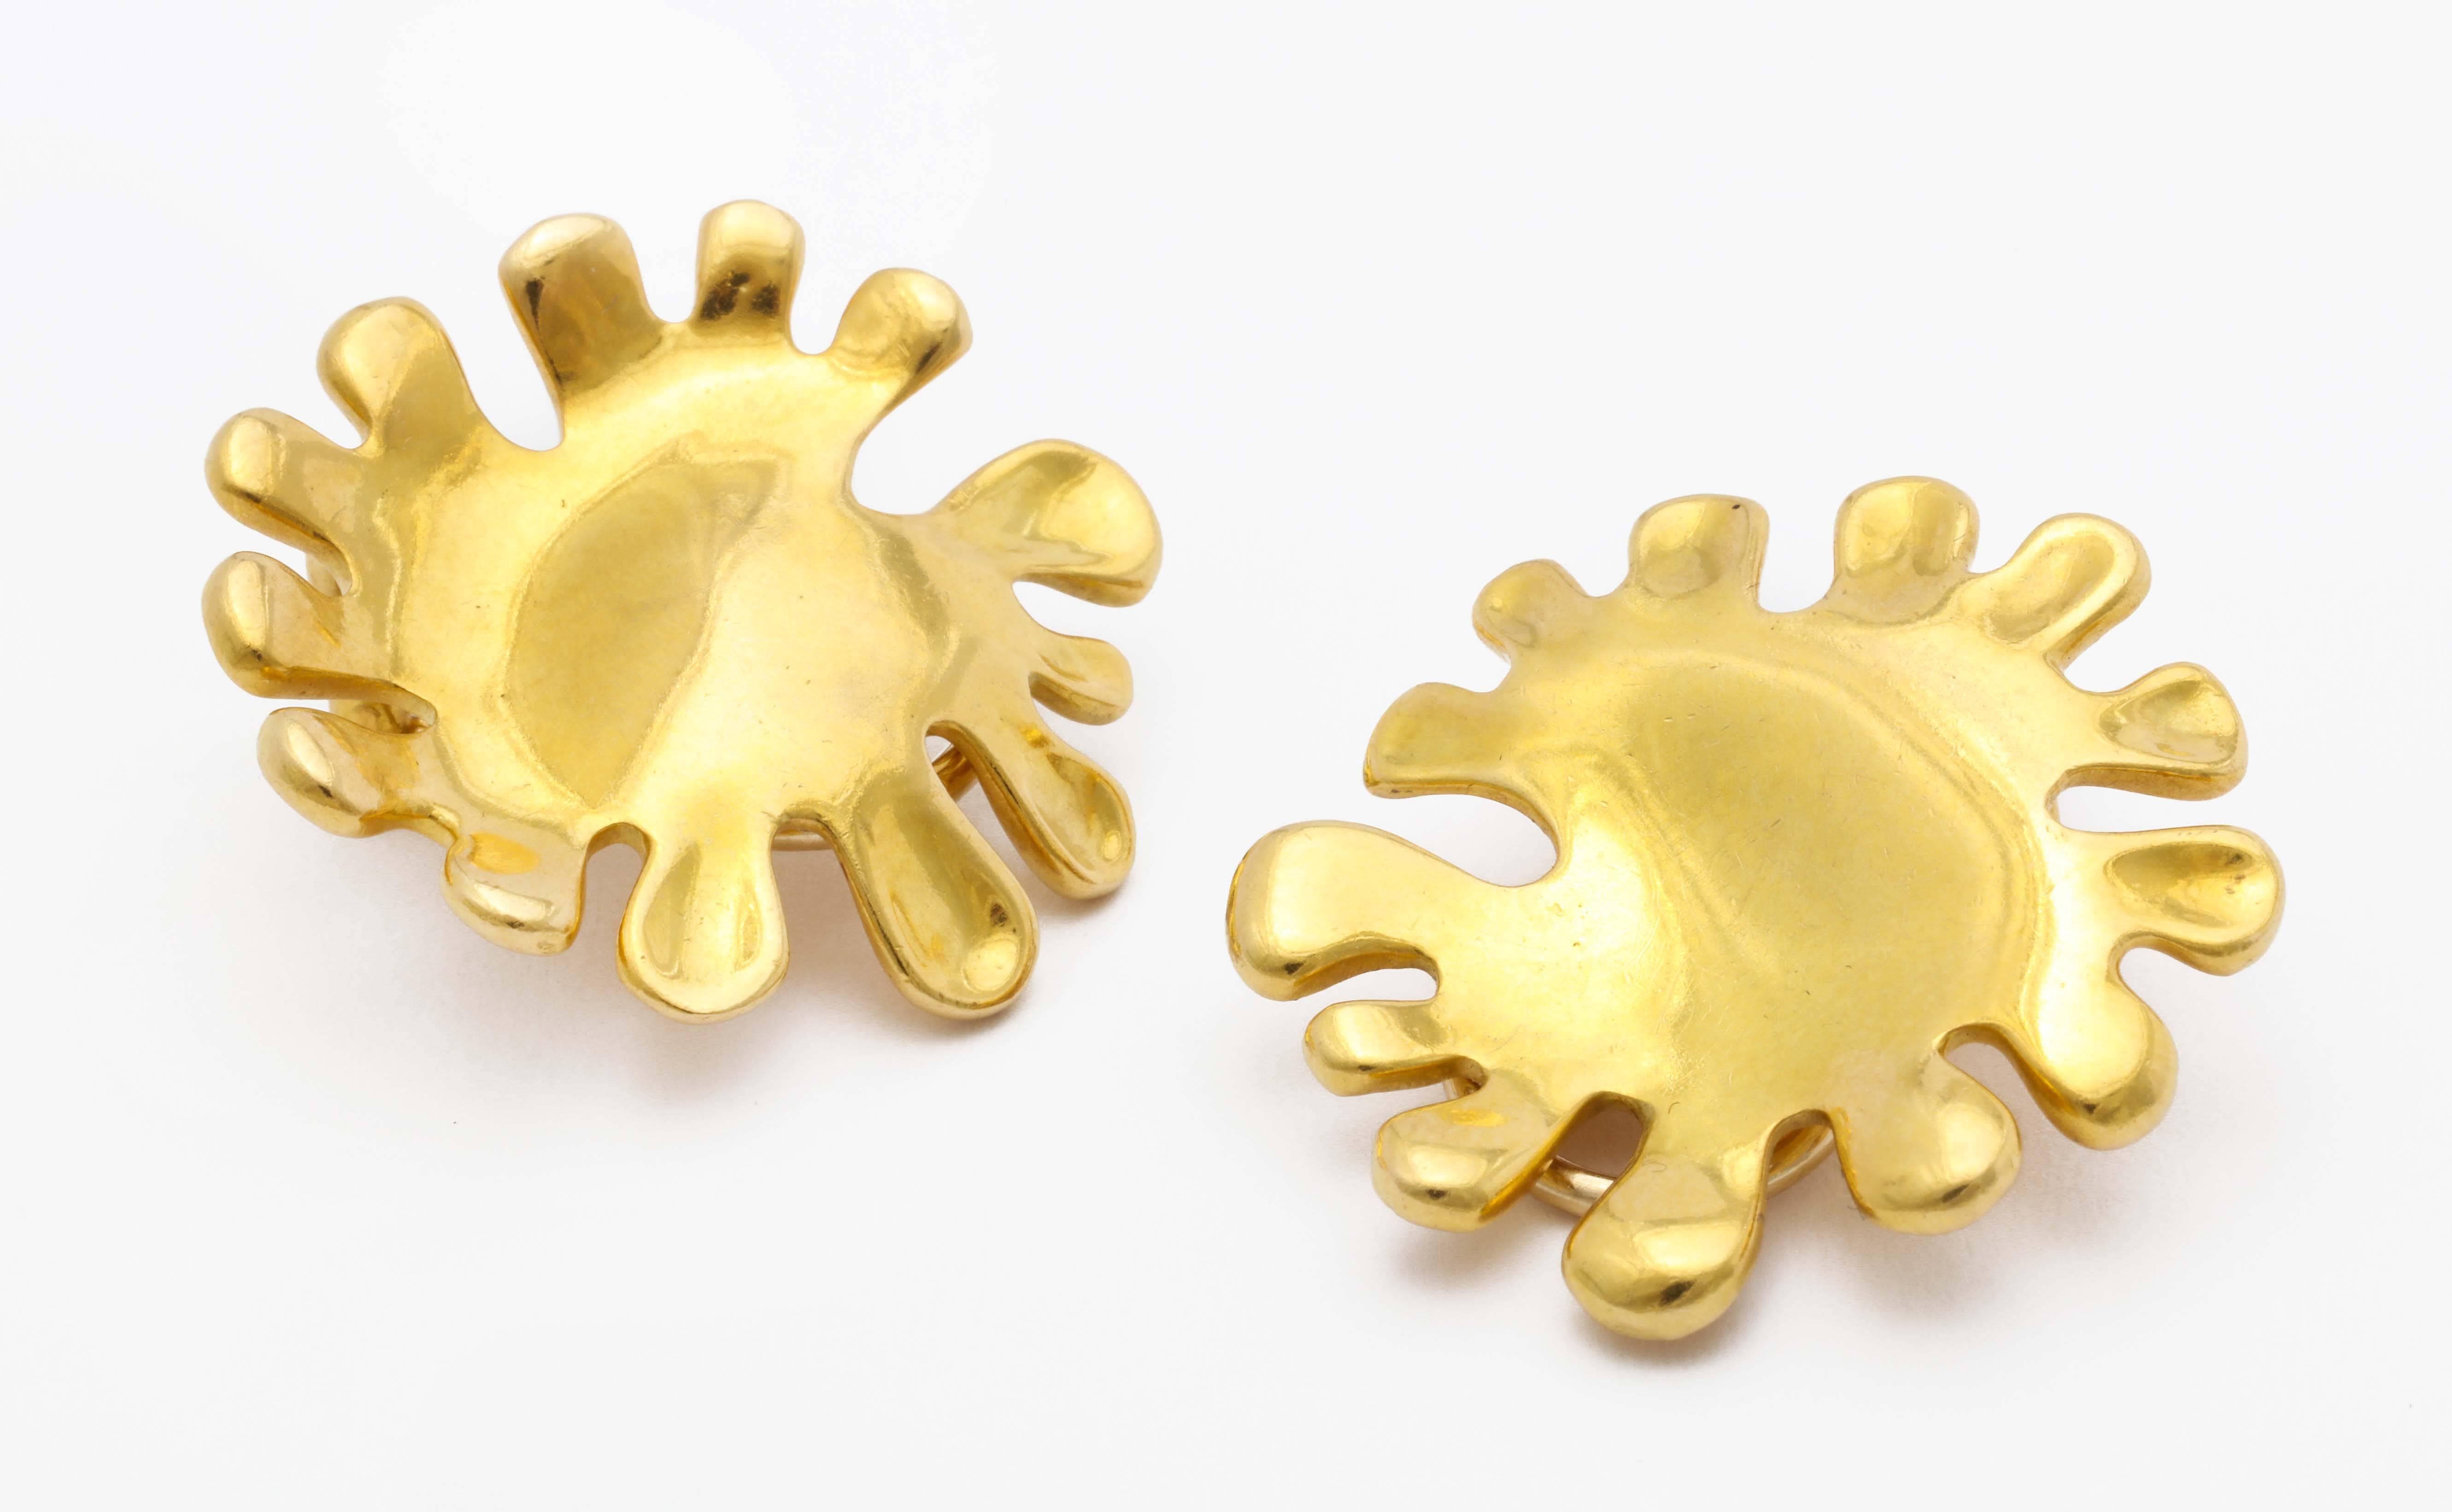 18k yellow gold abstract sunflower earrings by Tiffany & Co
15 grams 18k yellow gold
1981